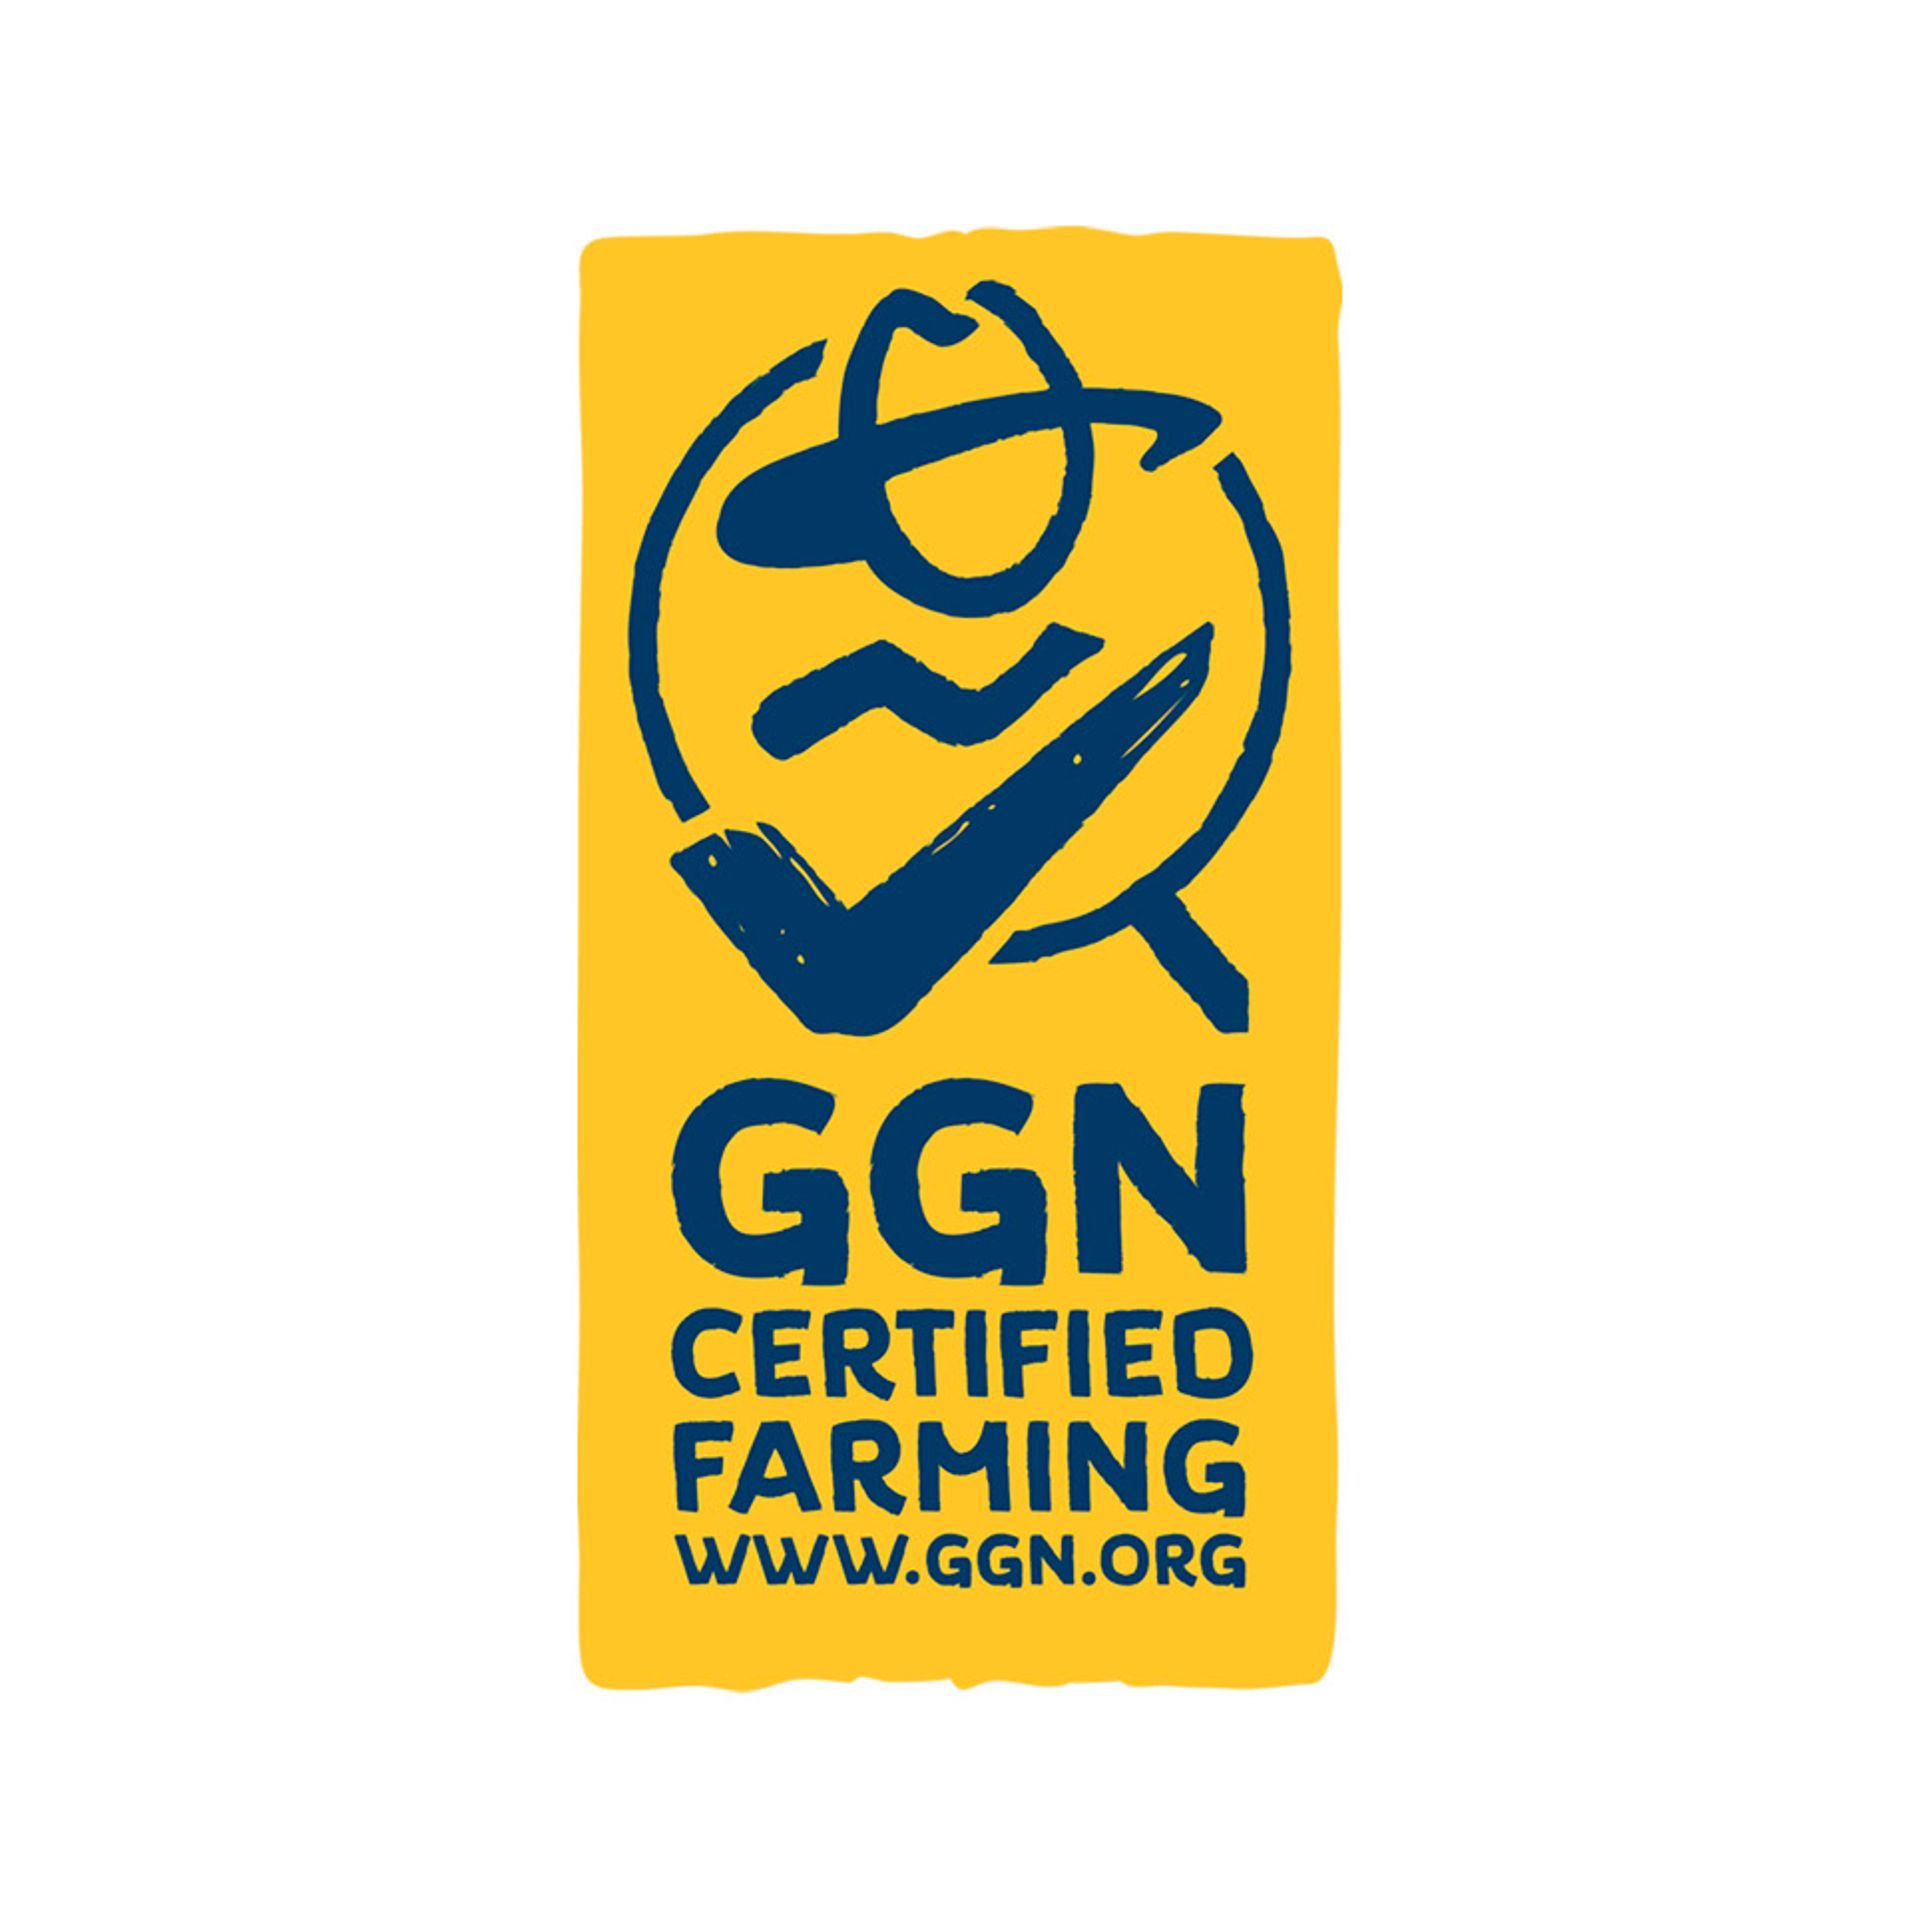 The GGN label logo that can be found on product packaging